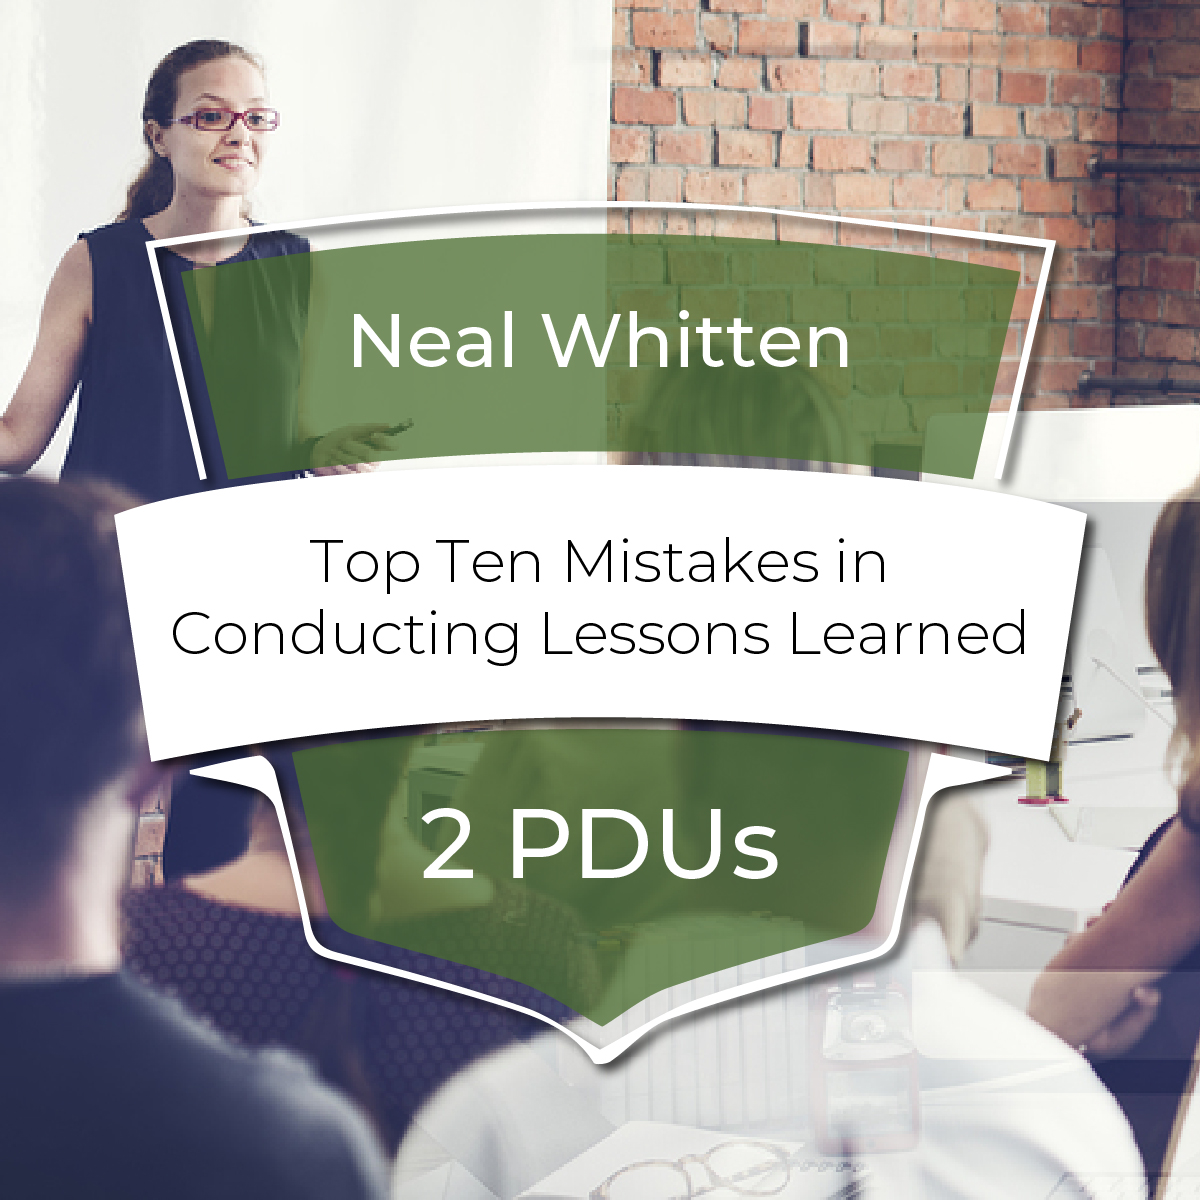 Top 10 Mistakes In Conducting Lessons Learned